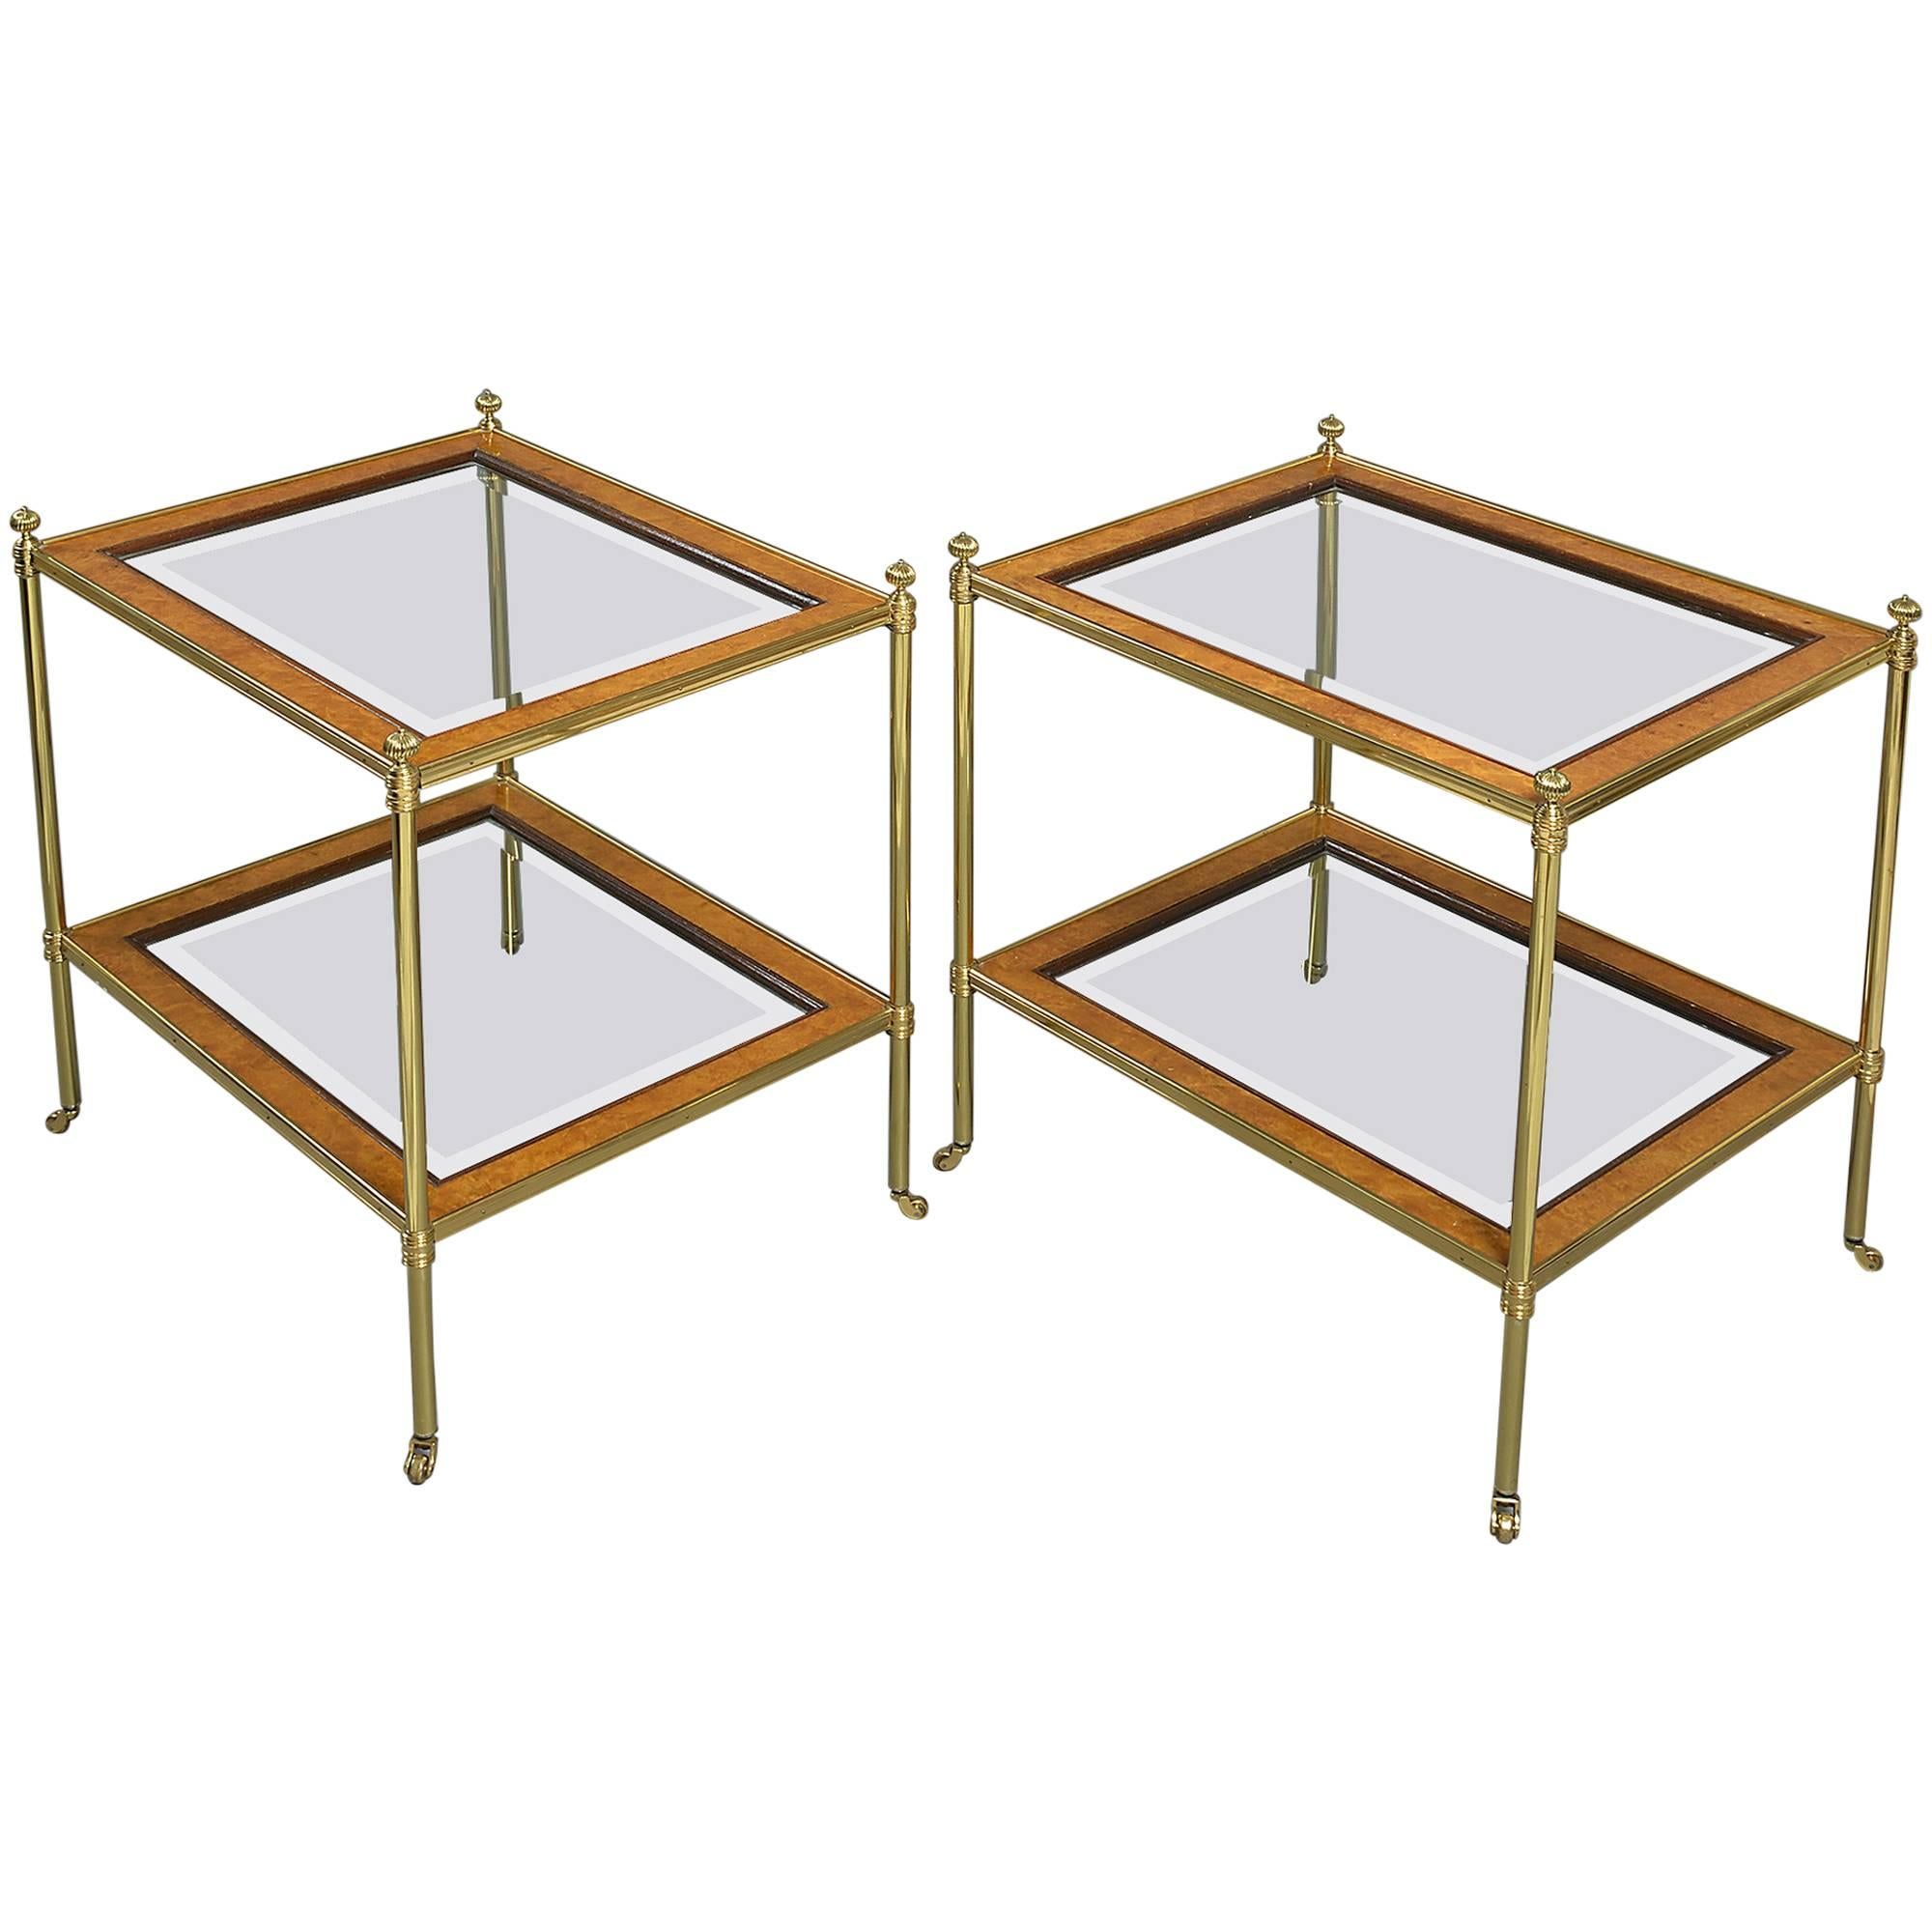 20th Century Pair of 'Mallett' Two-Tier Tables